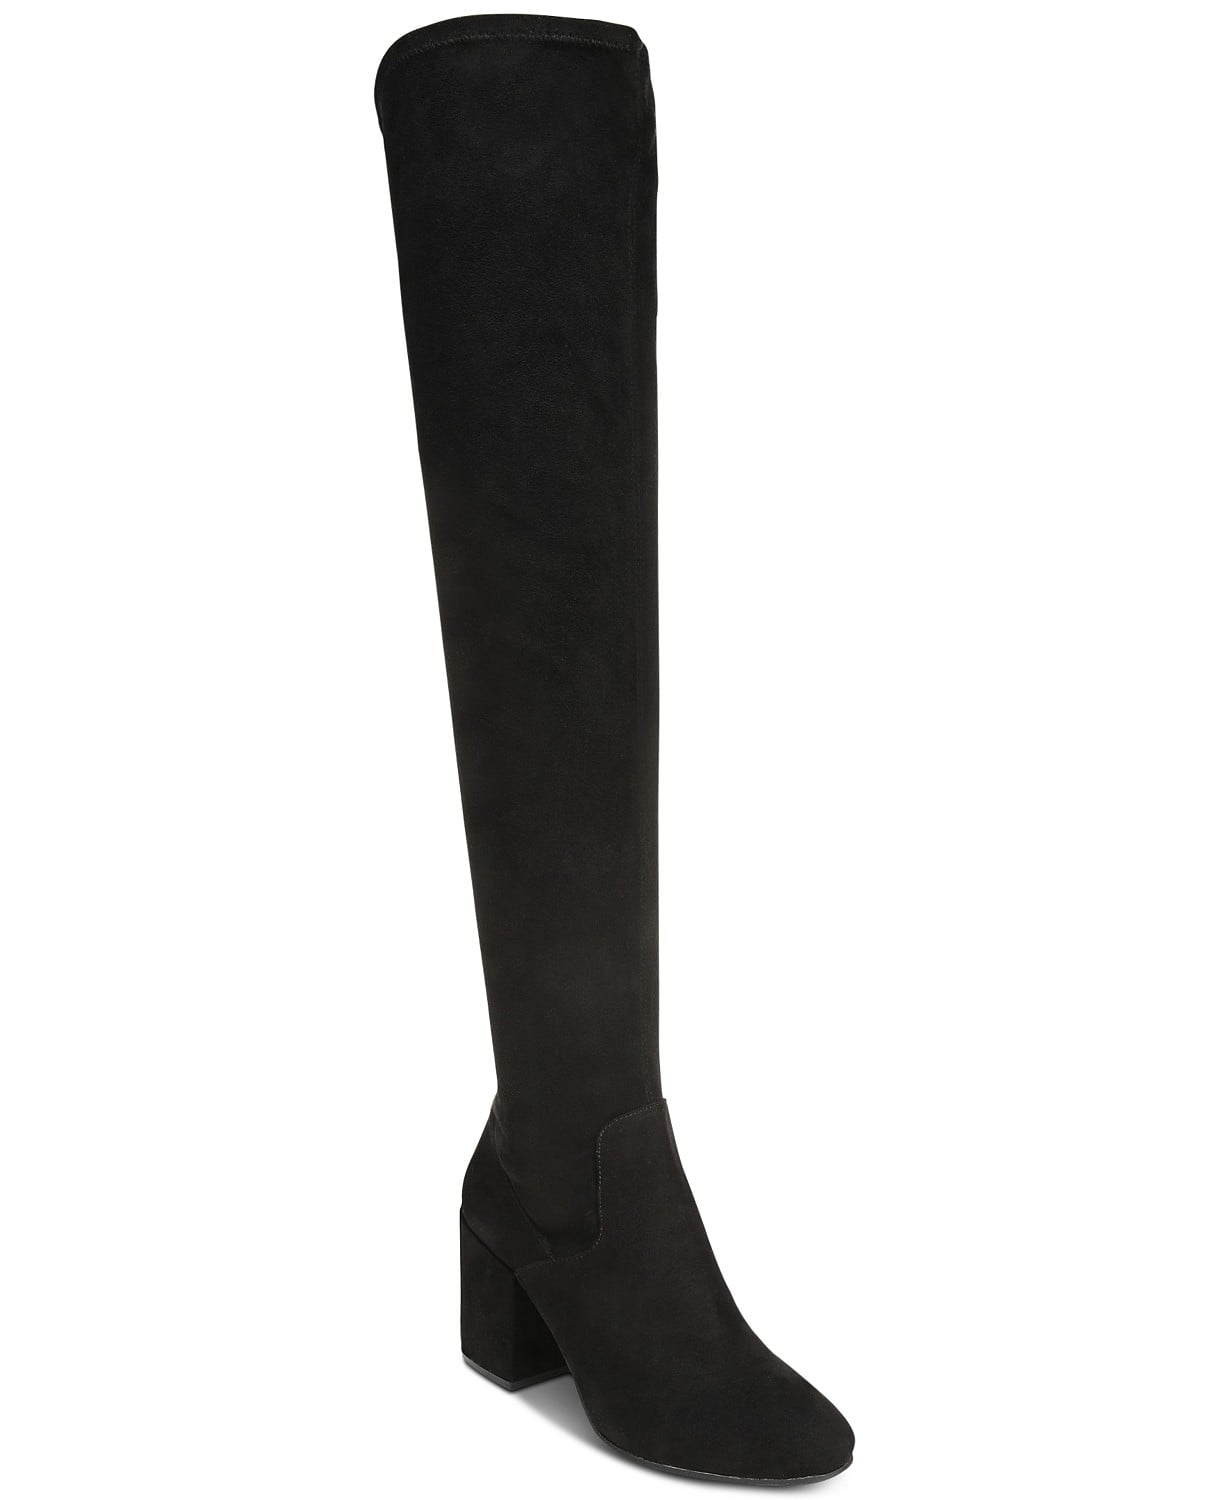 Best Over-the-Knee Boots 2020 